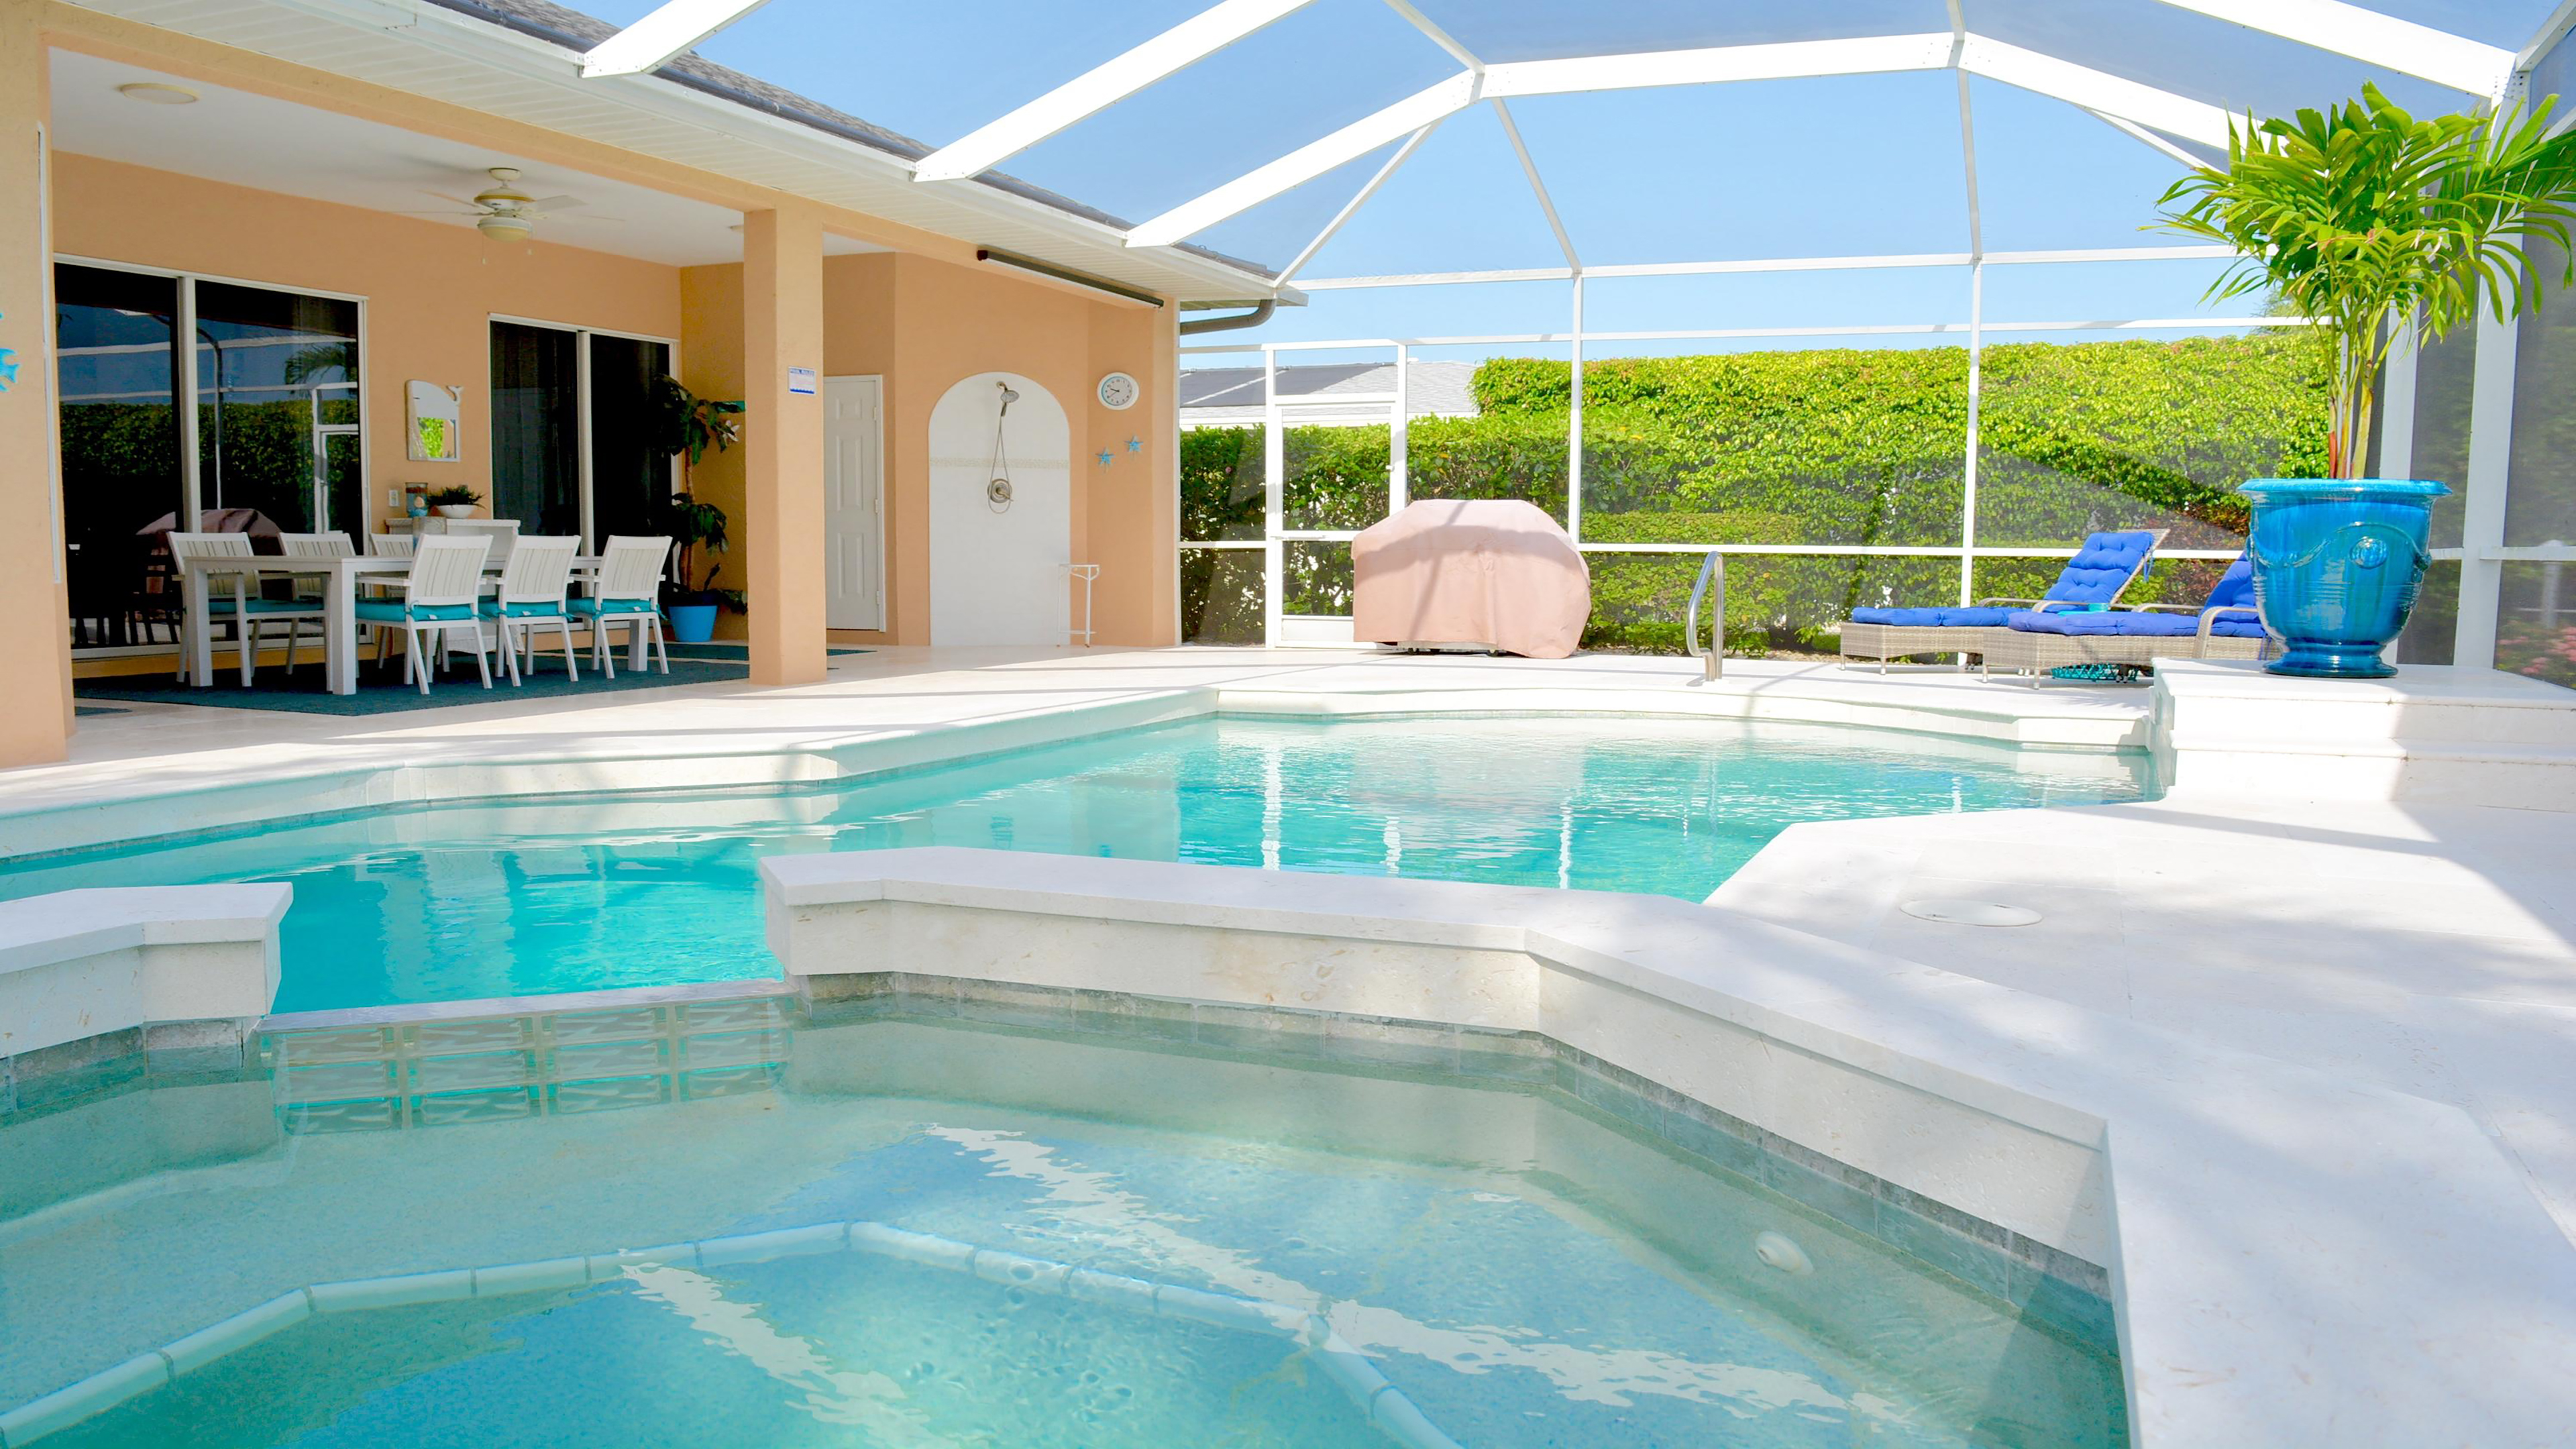 Pool and spa can be electrically heated